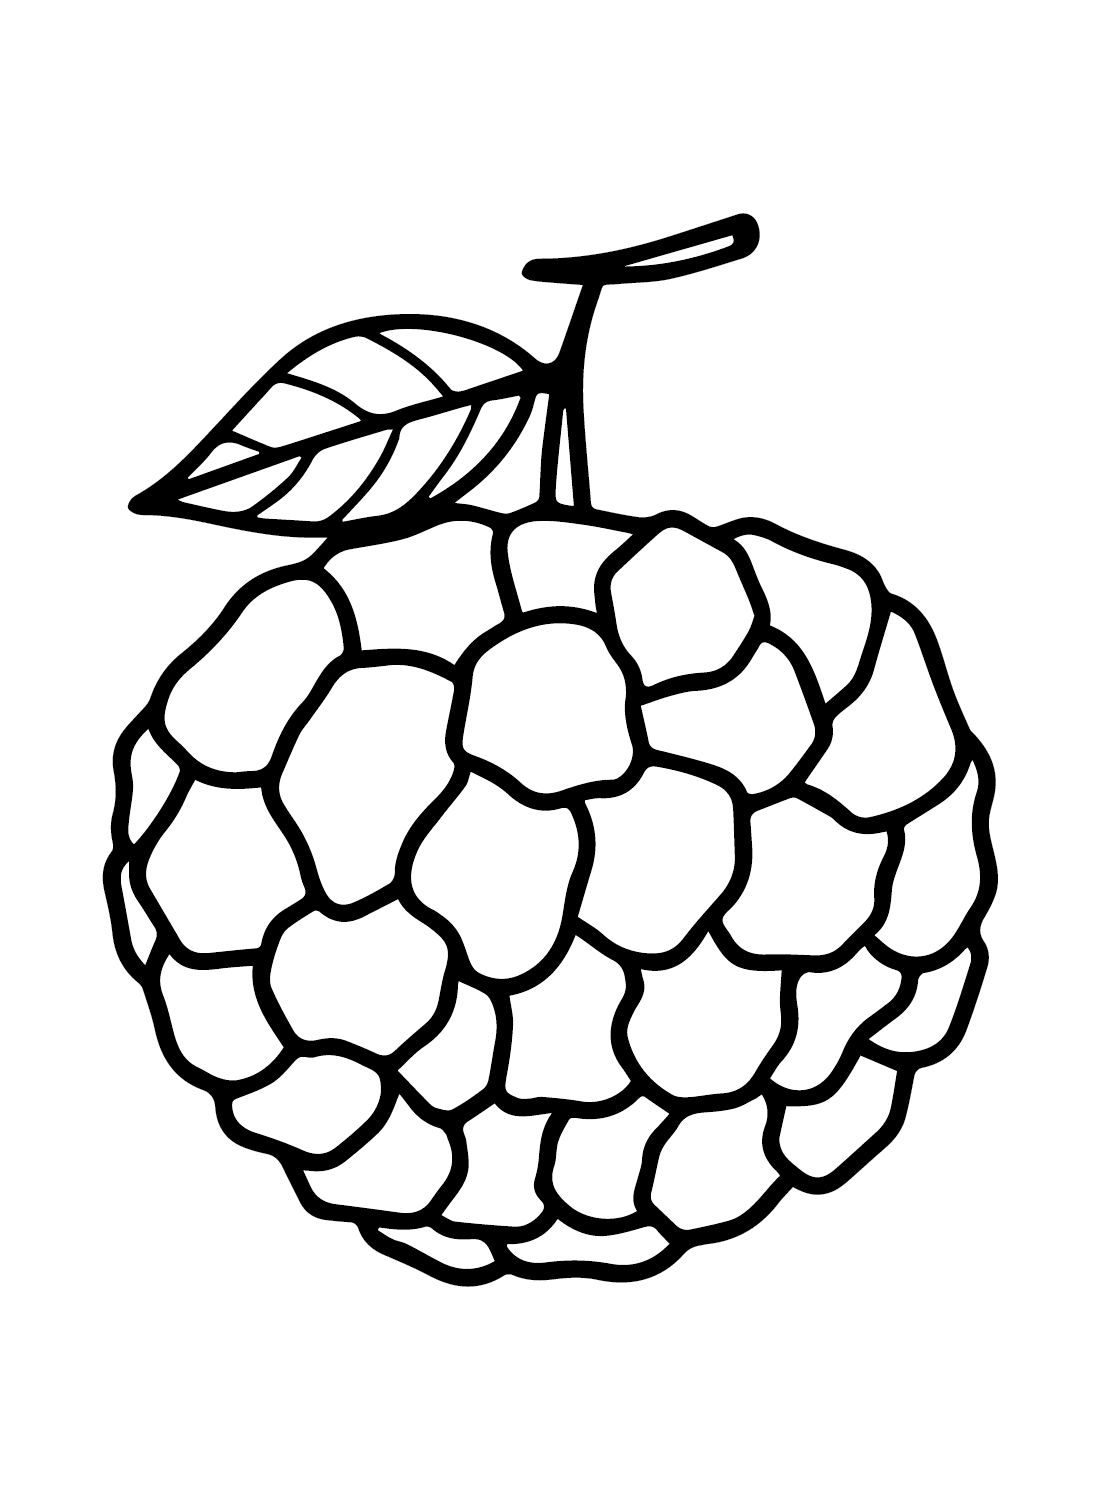 Custard apple coloring pages printable for free download